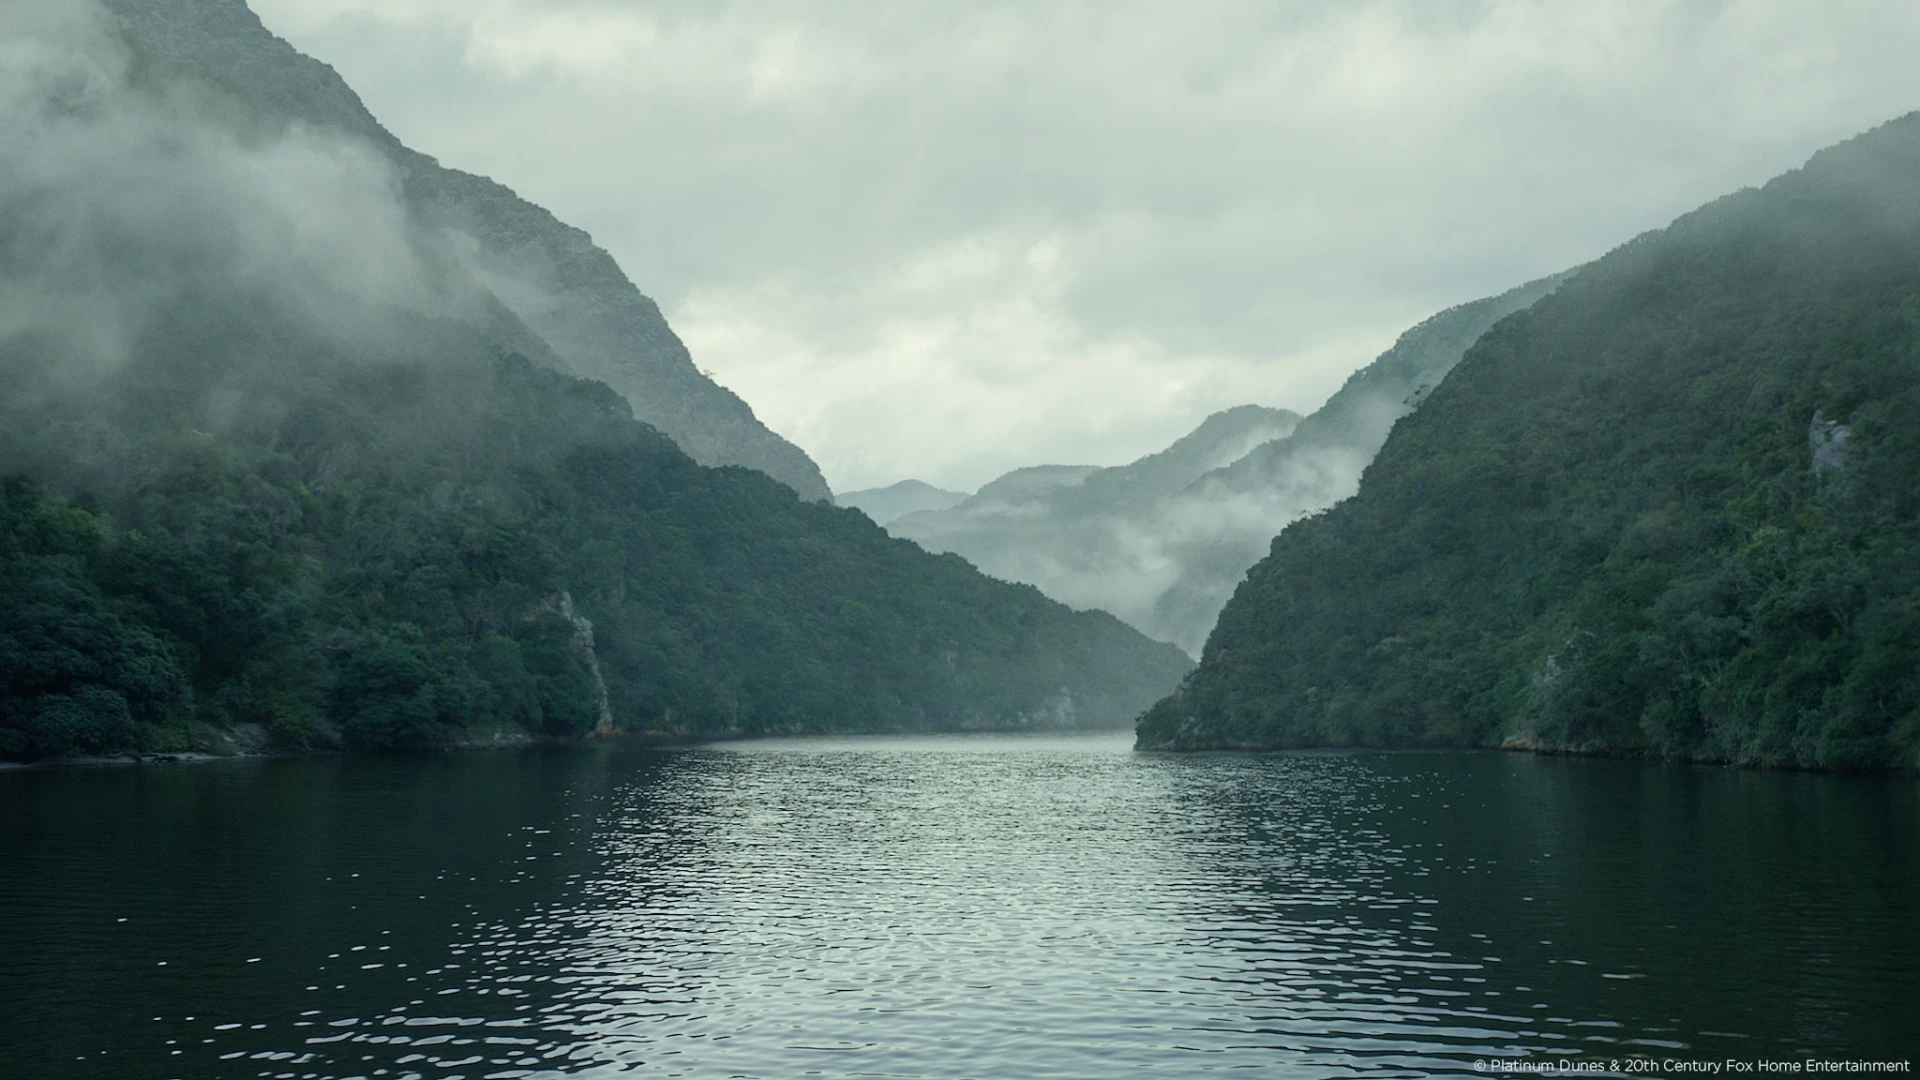 Black Sails river and mountain view Raynault vfx